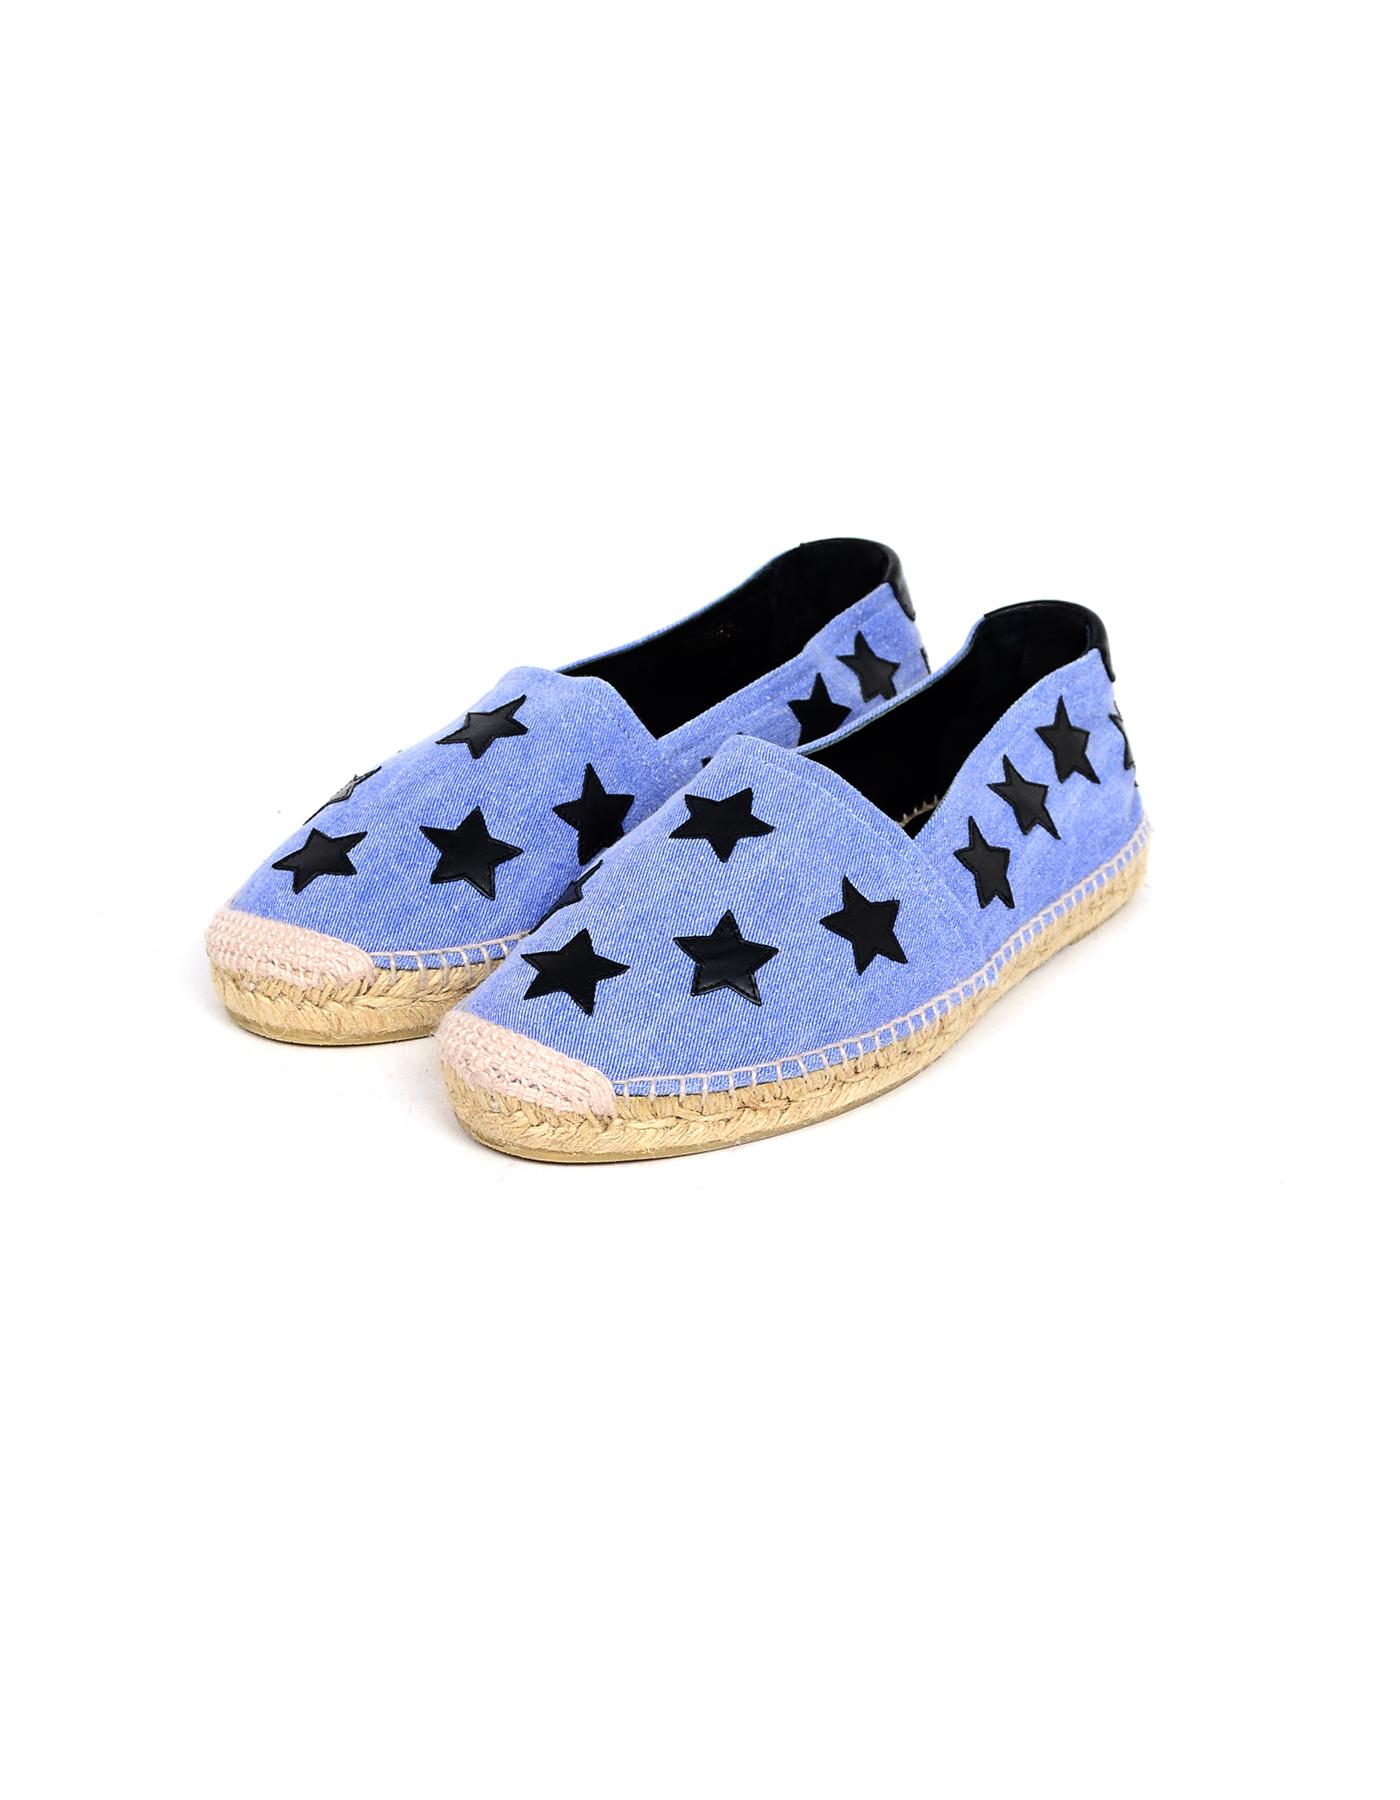 Yves Saint Laurent Blue/Black Men's Denim/Leather Star Applique Espadrilles Sz 42

Made In: Spain
Color: Blue/black
Materials: Denim, rope, leather
Closure/Opening: Slide on
Overall Condition: Excellent pre-owned condition 

Measurements: 
Marked